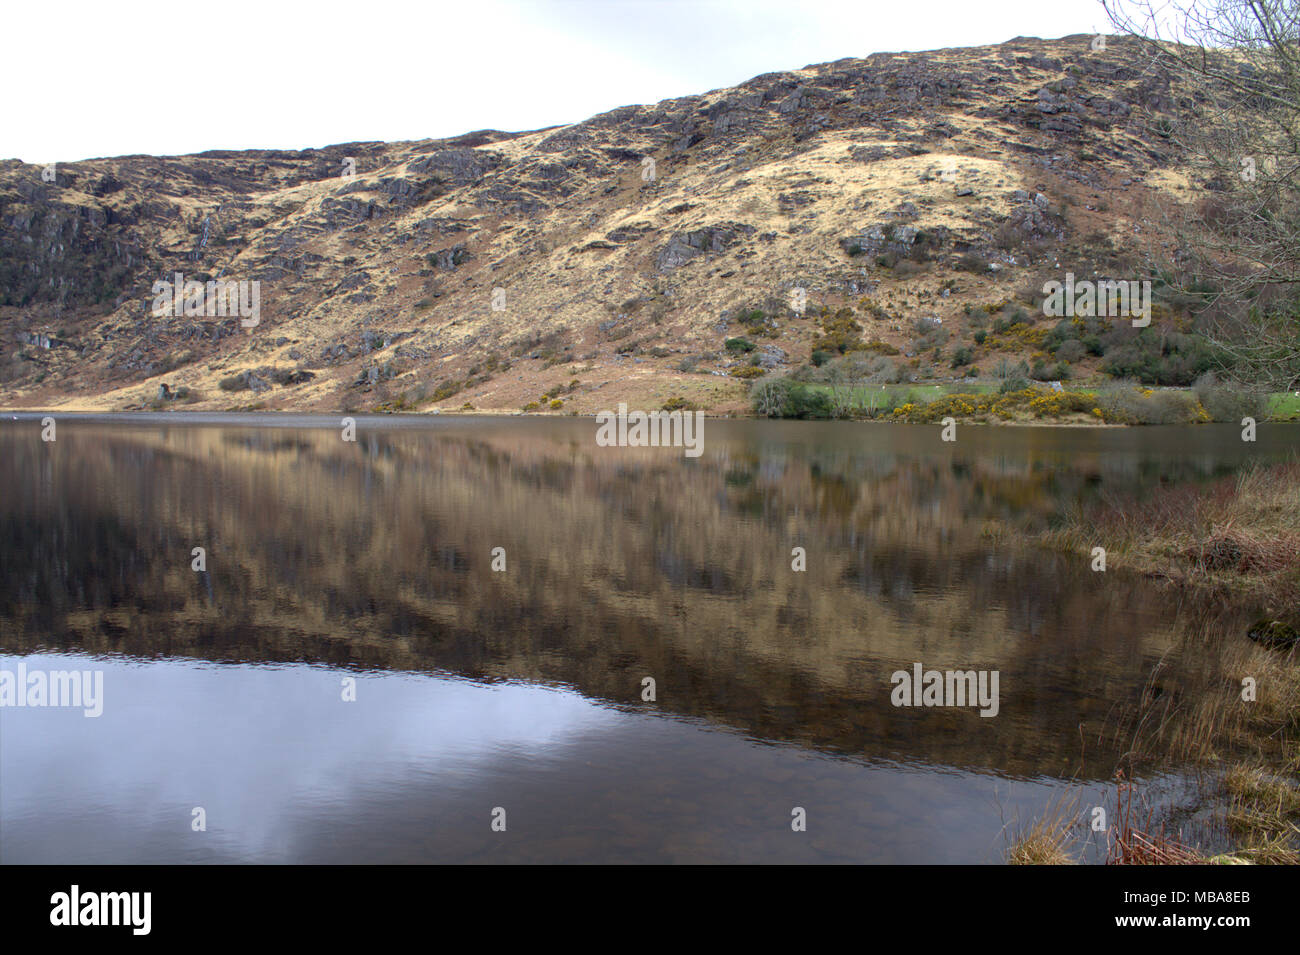 The hills around the lake at gougane barra, ireland reflected in the still dark waters of the lake. A popular tourist and holiday makers destination. Stock Photo